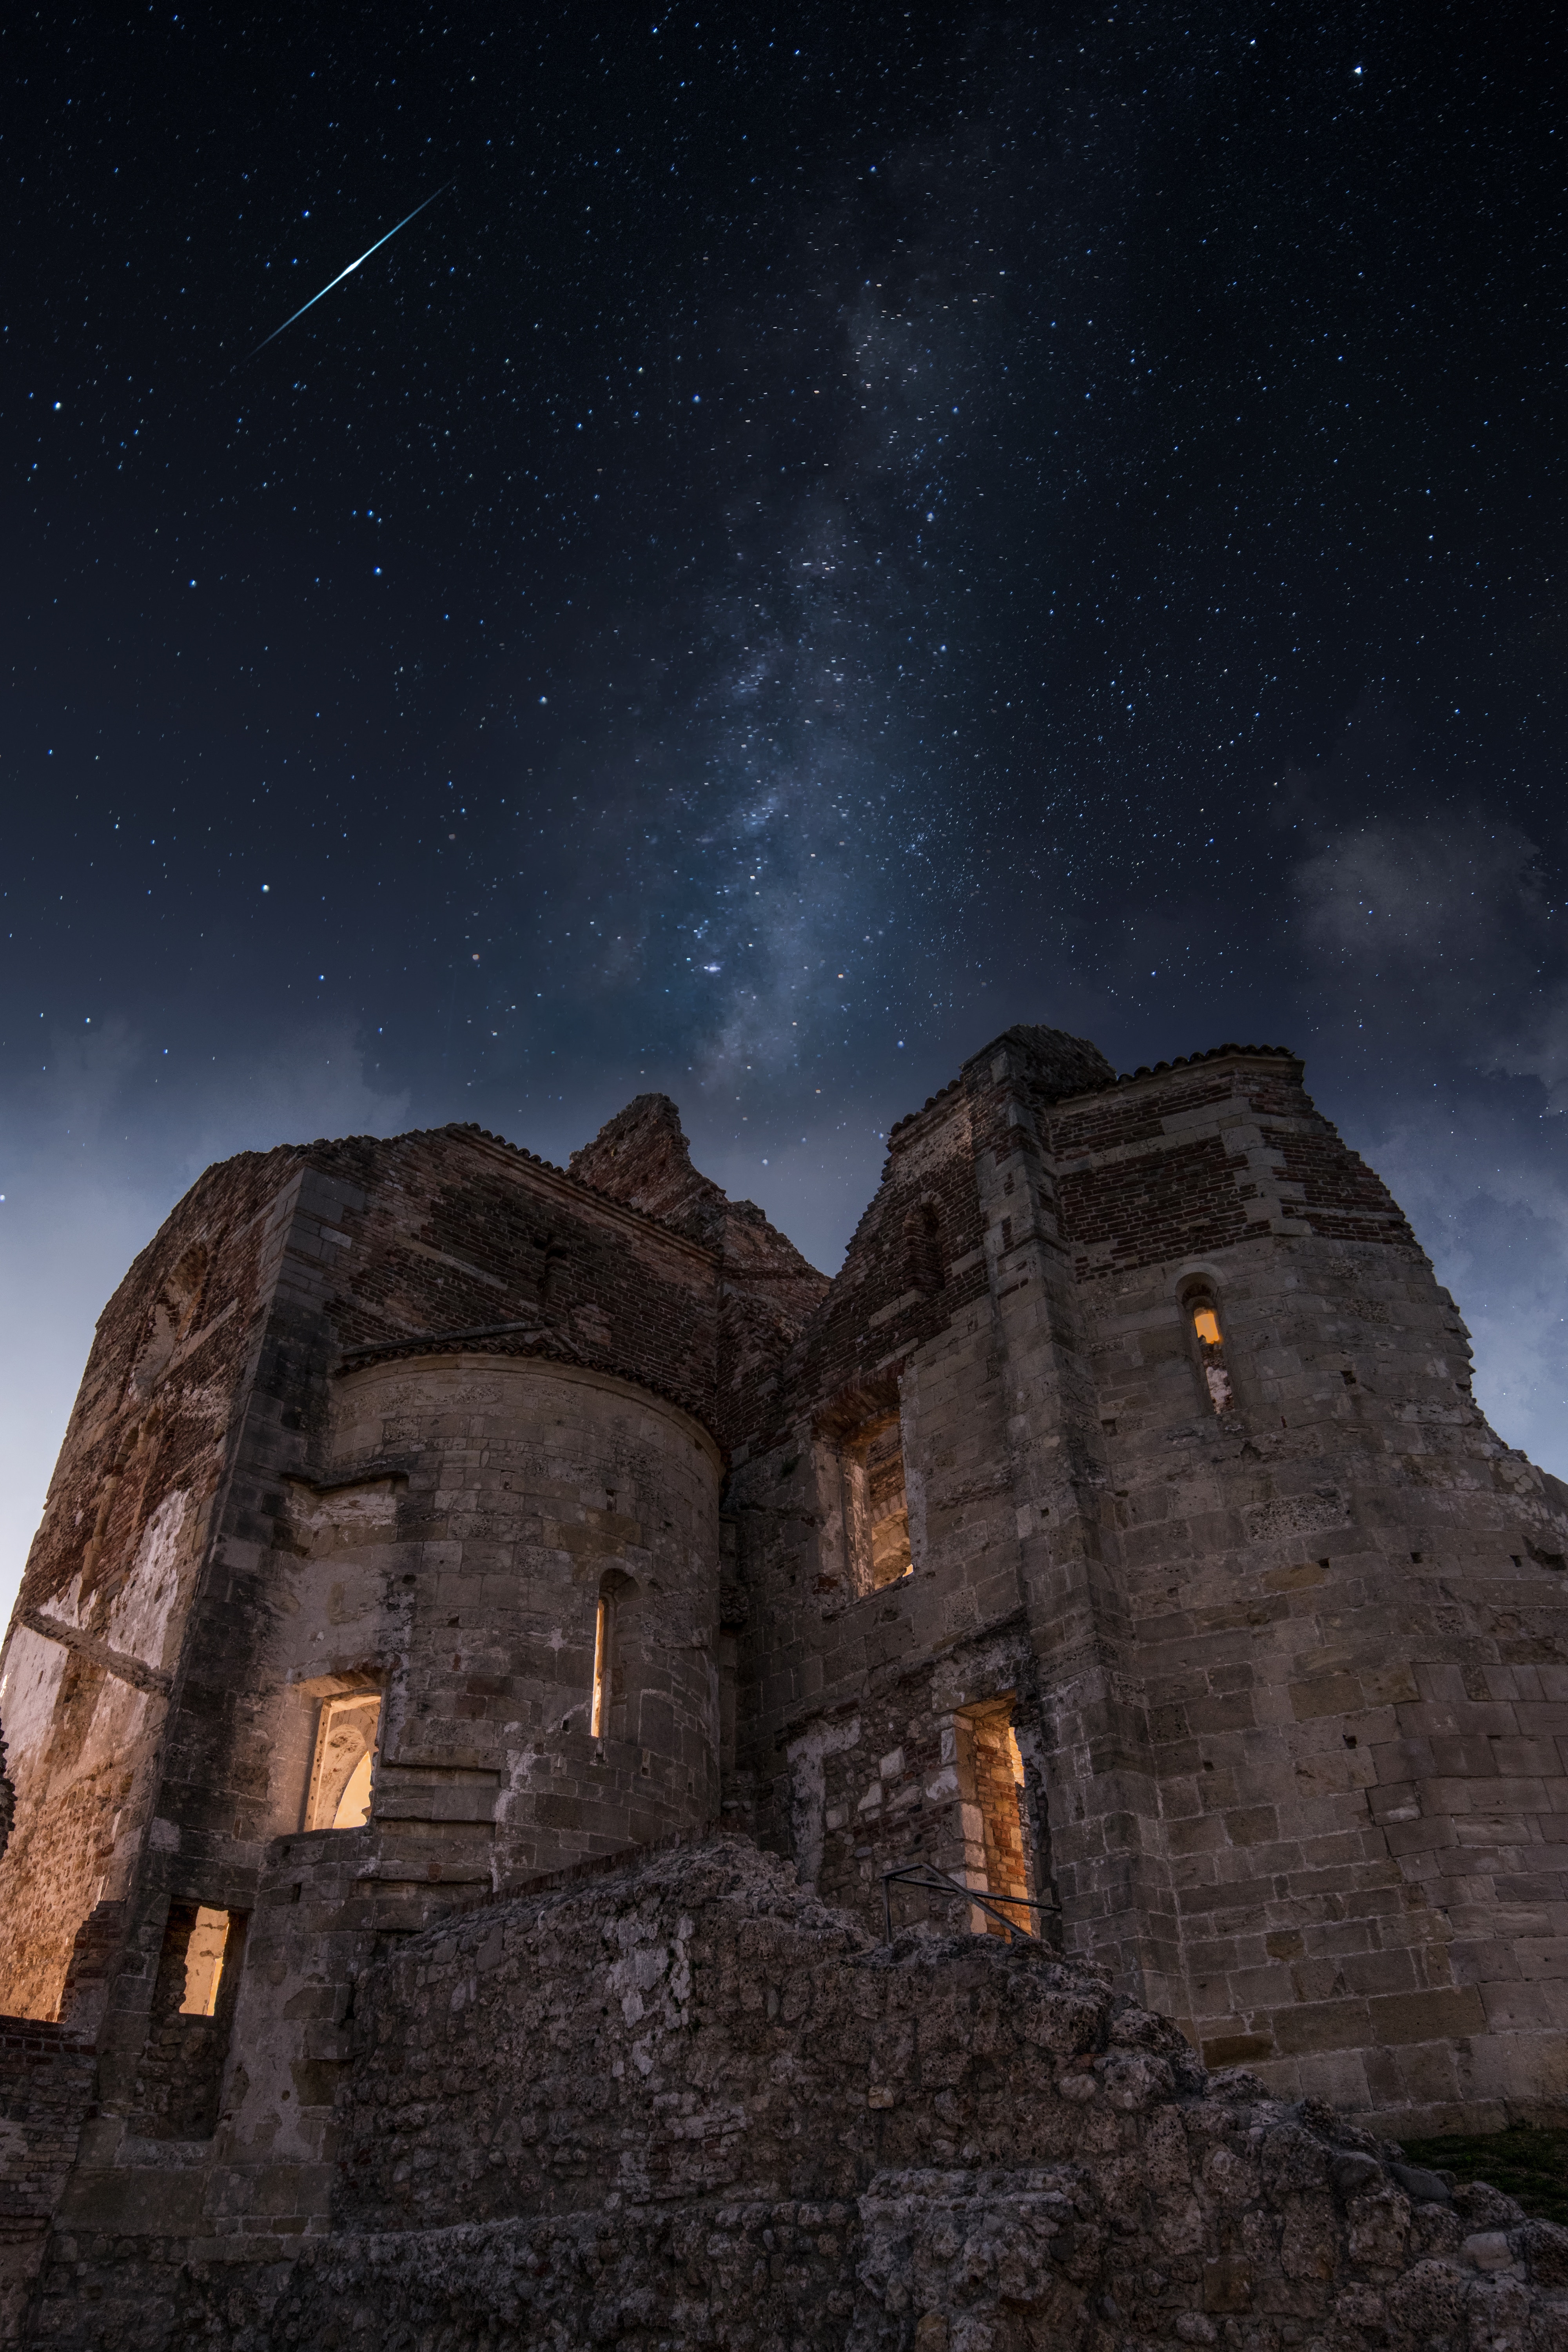 ruin, nature, architecture, italy, starry sky, ruins, veneto High Definition image